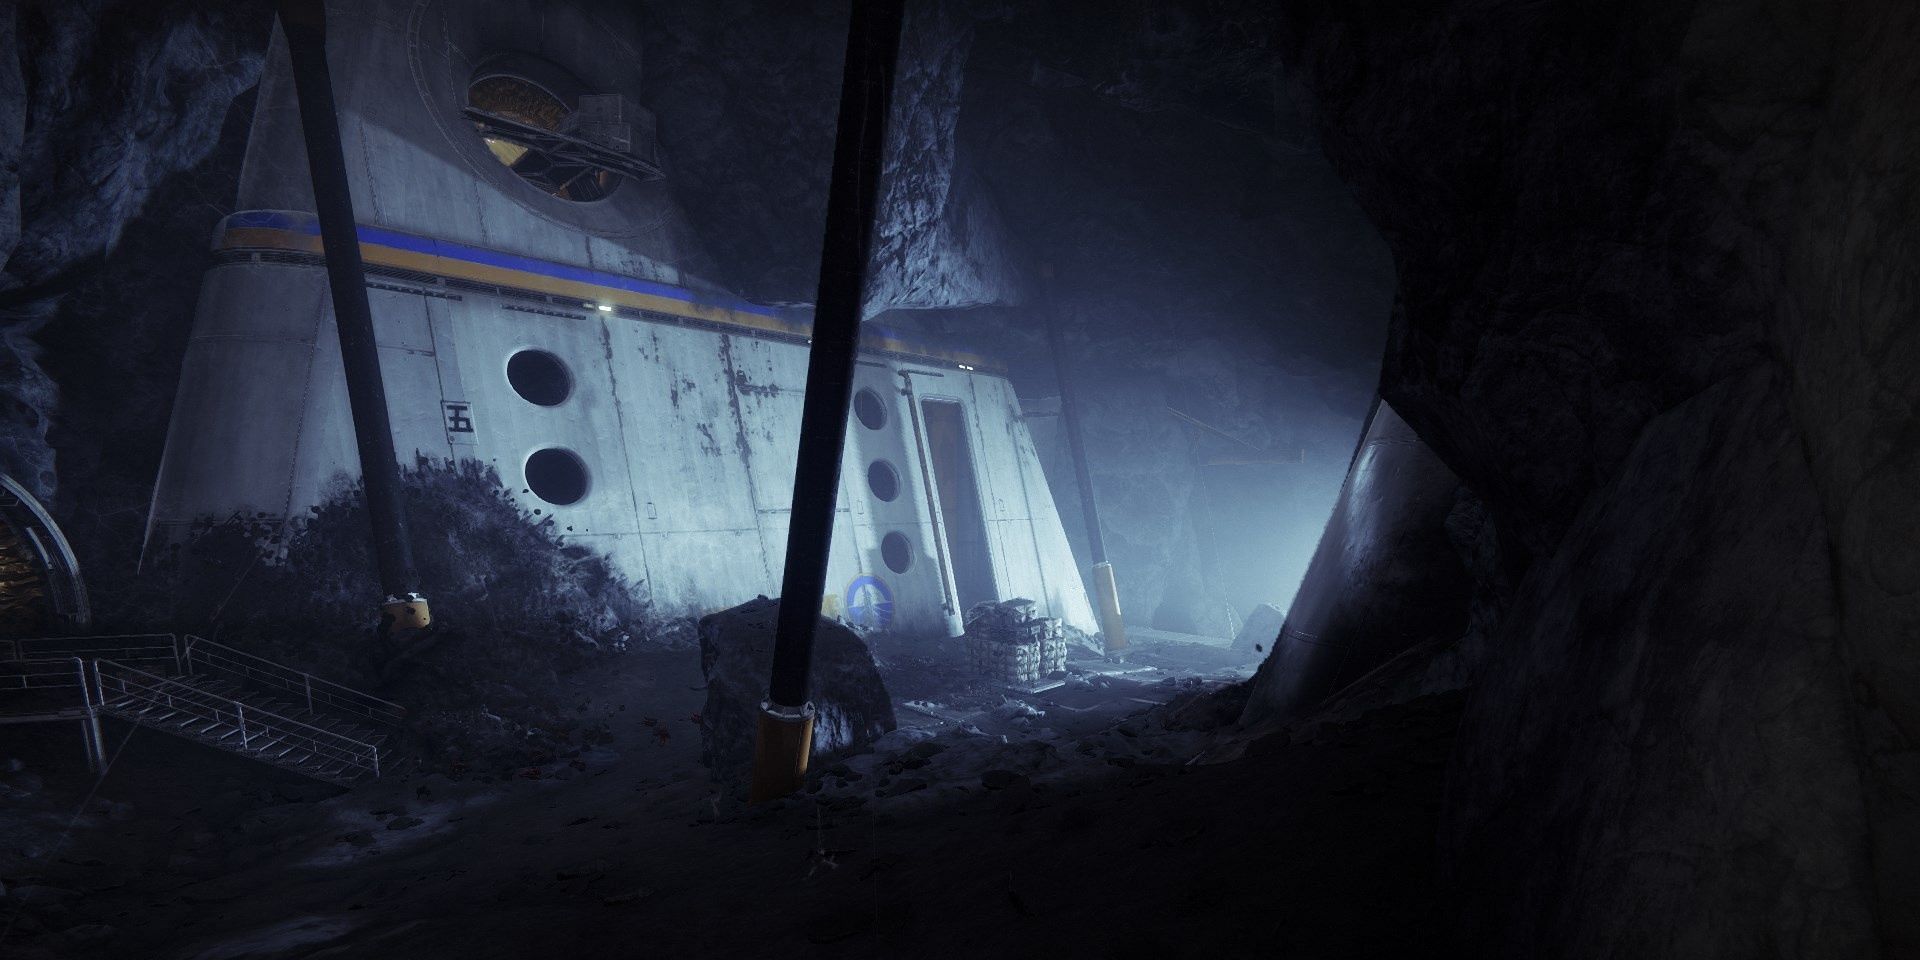 Entrance to the K1 revelations lost sector (Image via Destiny 2)